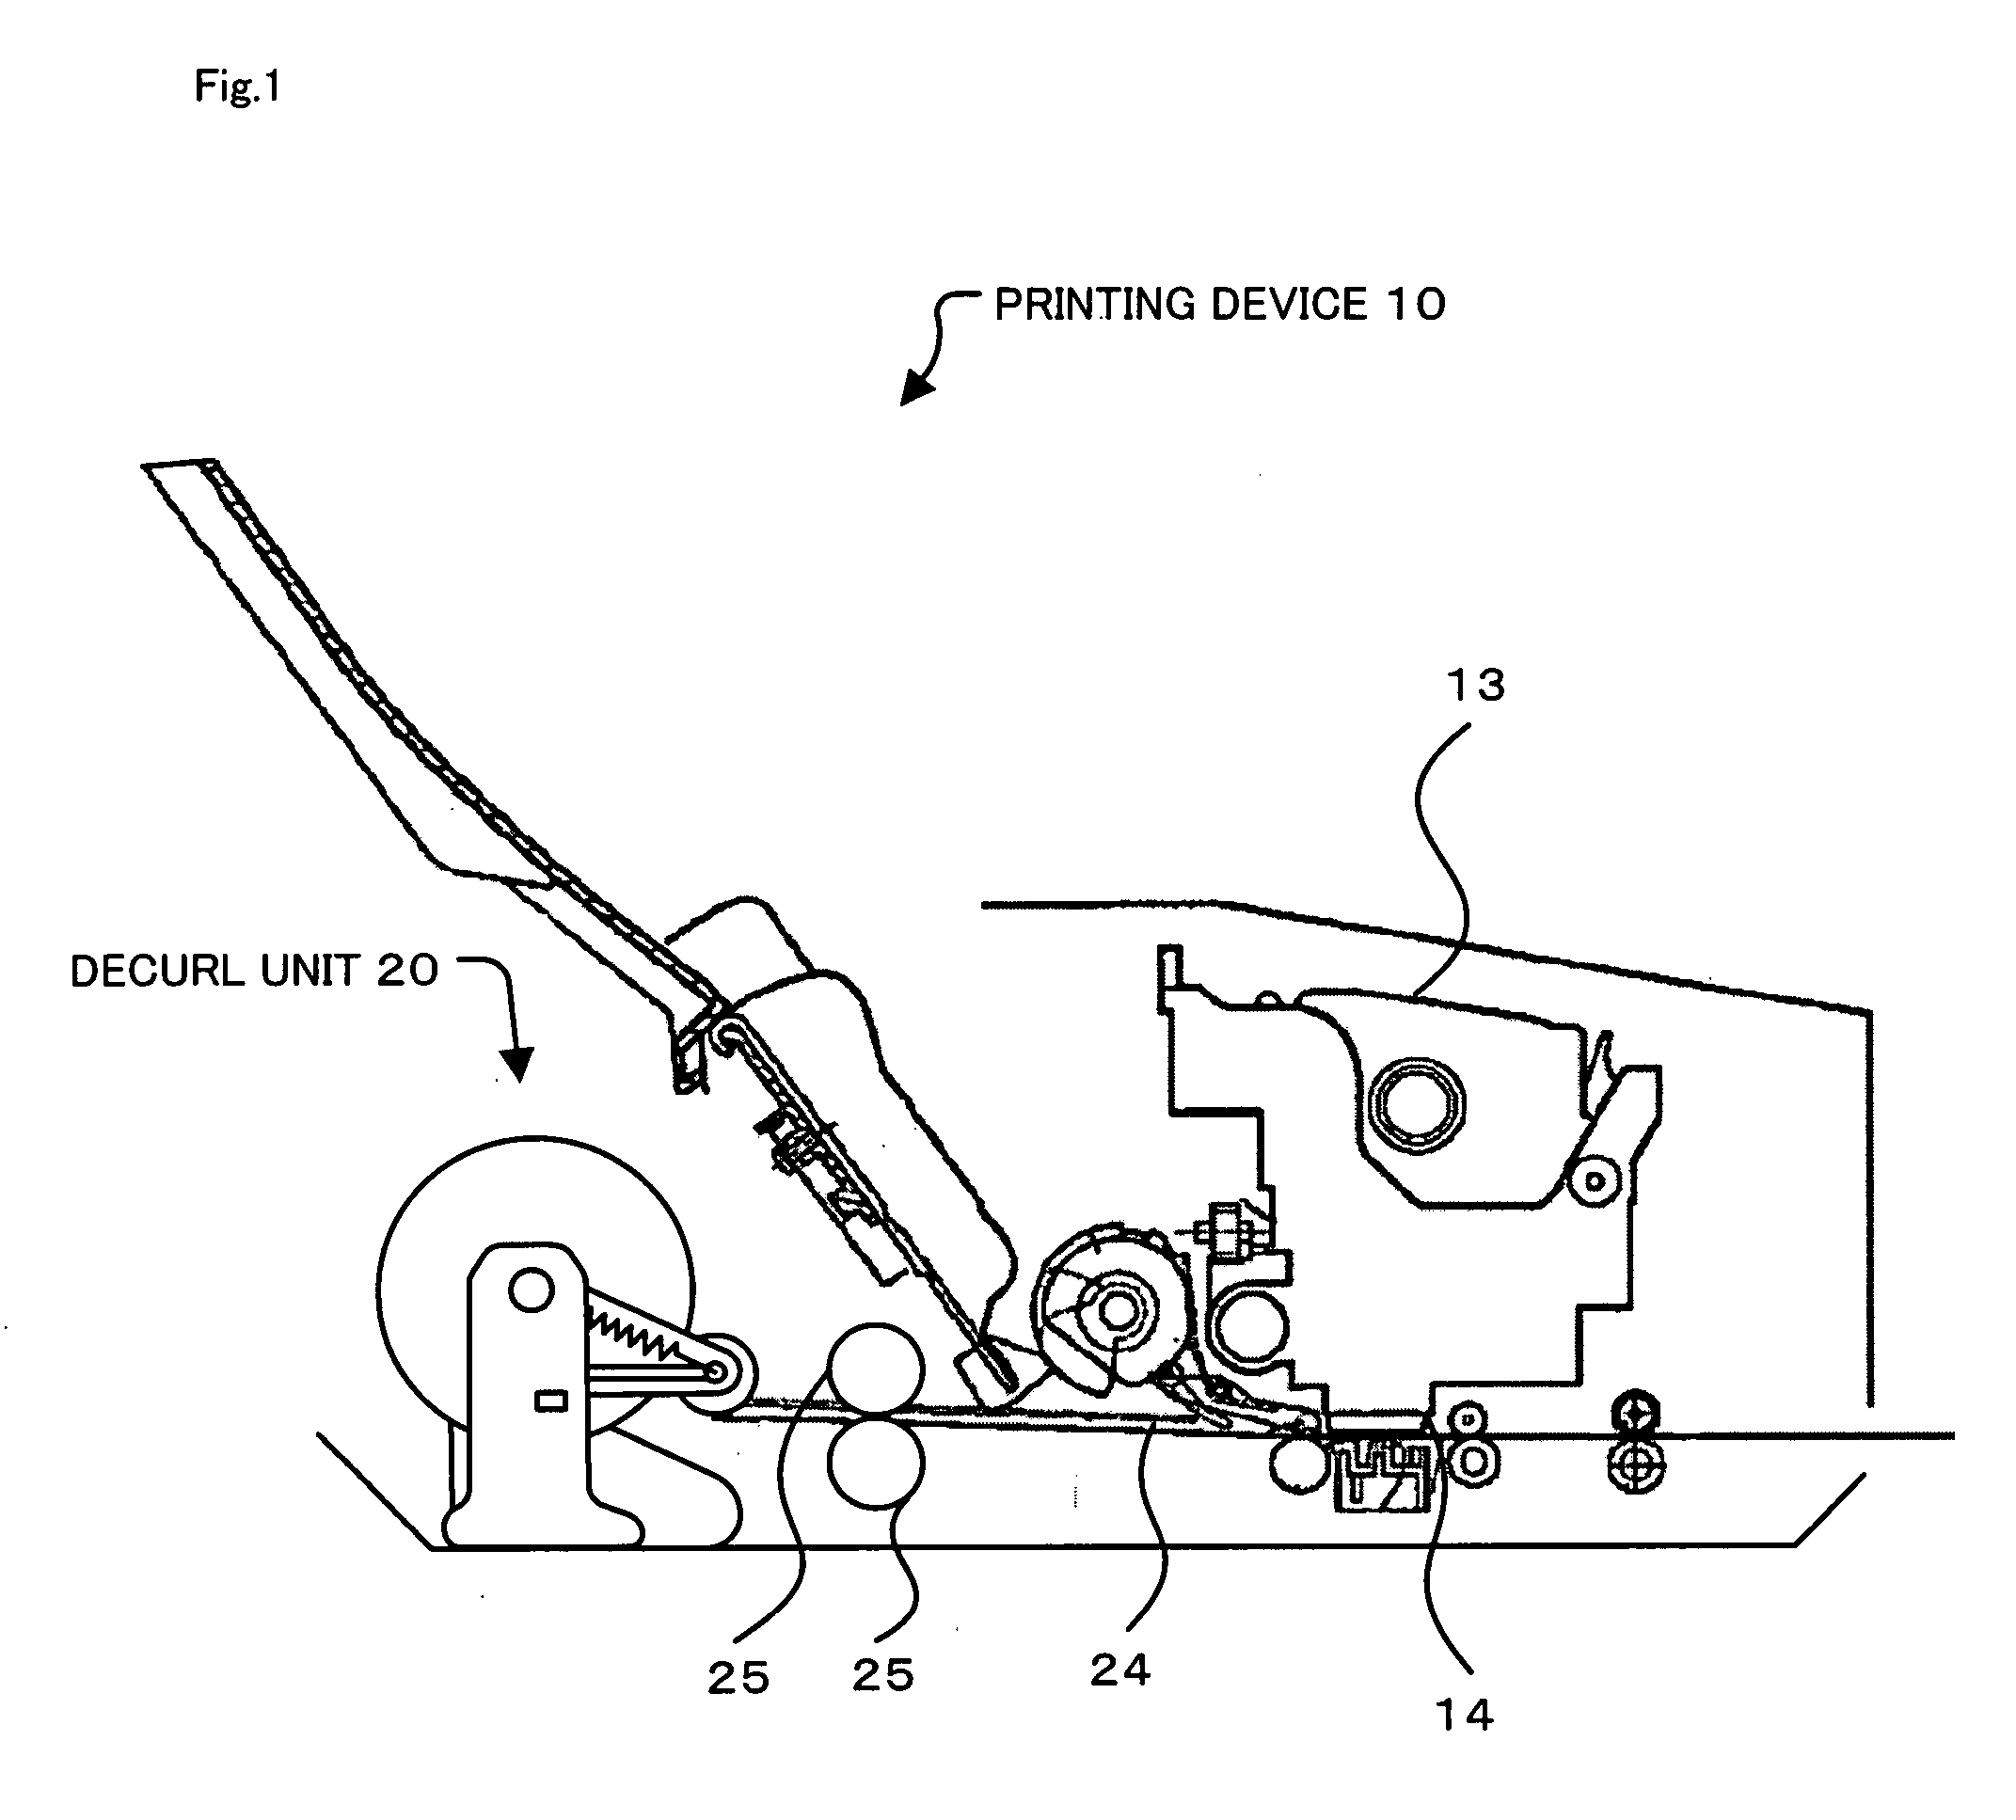 Decurl unit and printing device